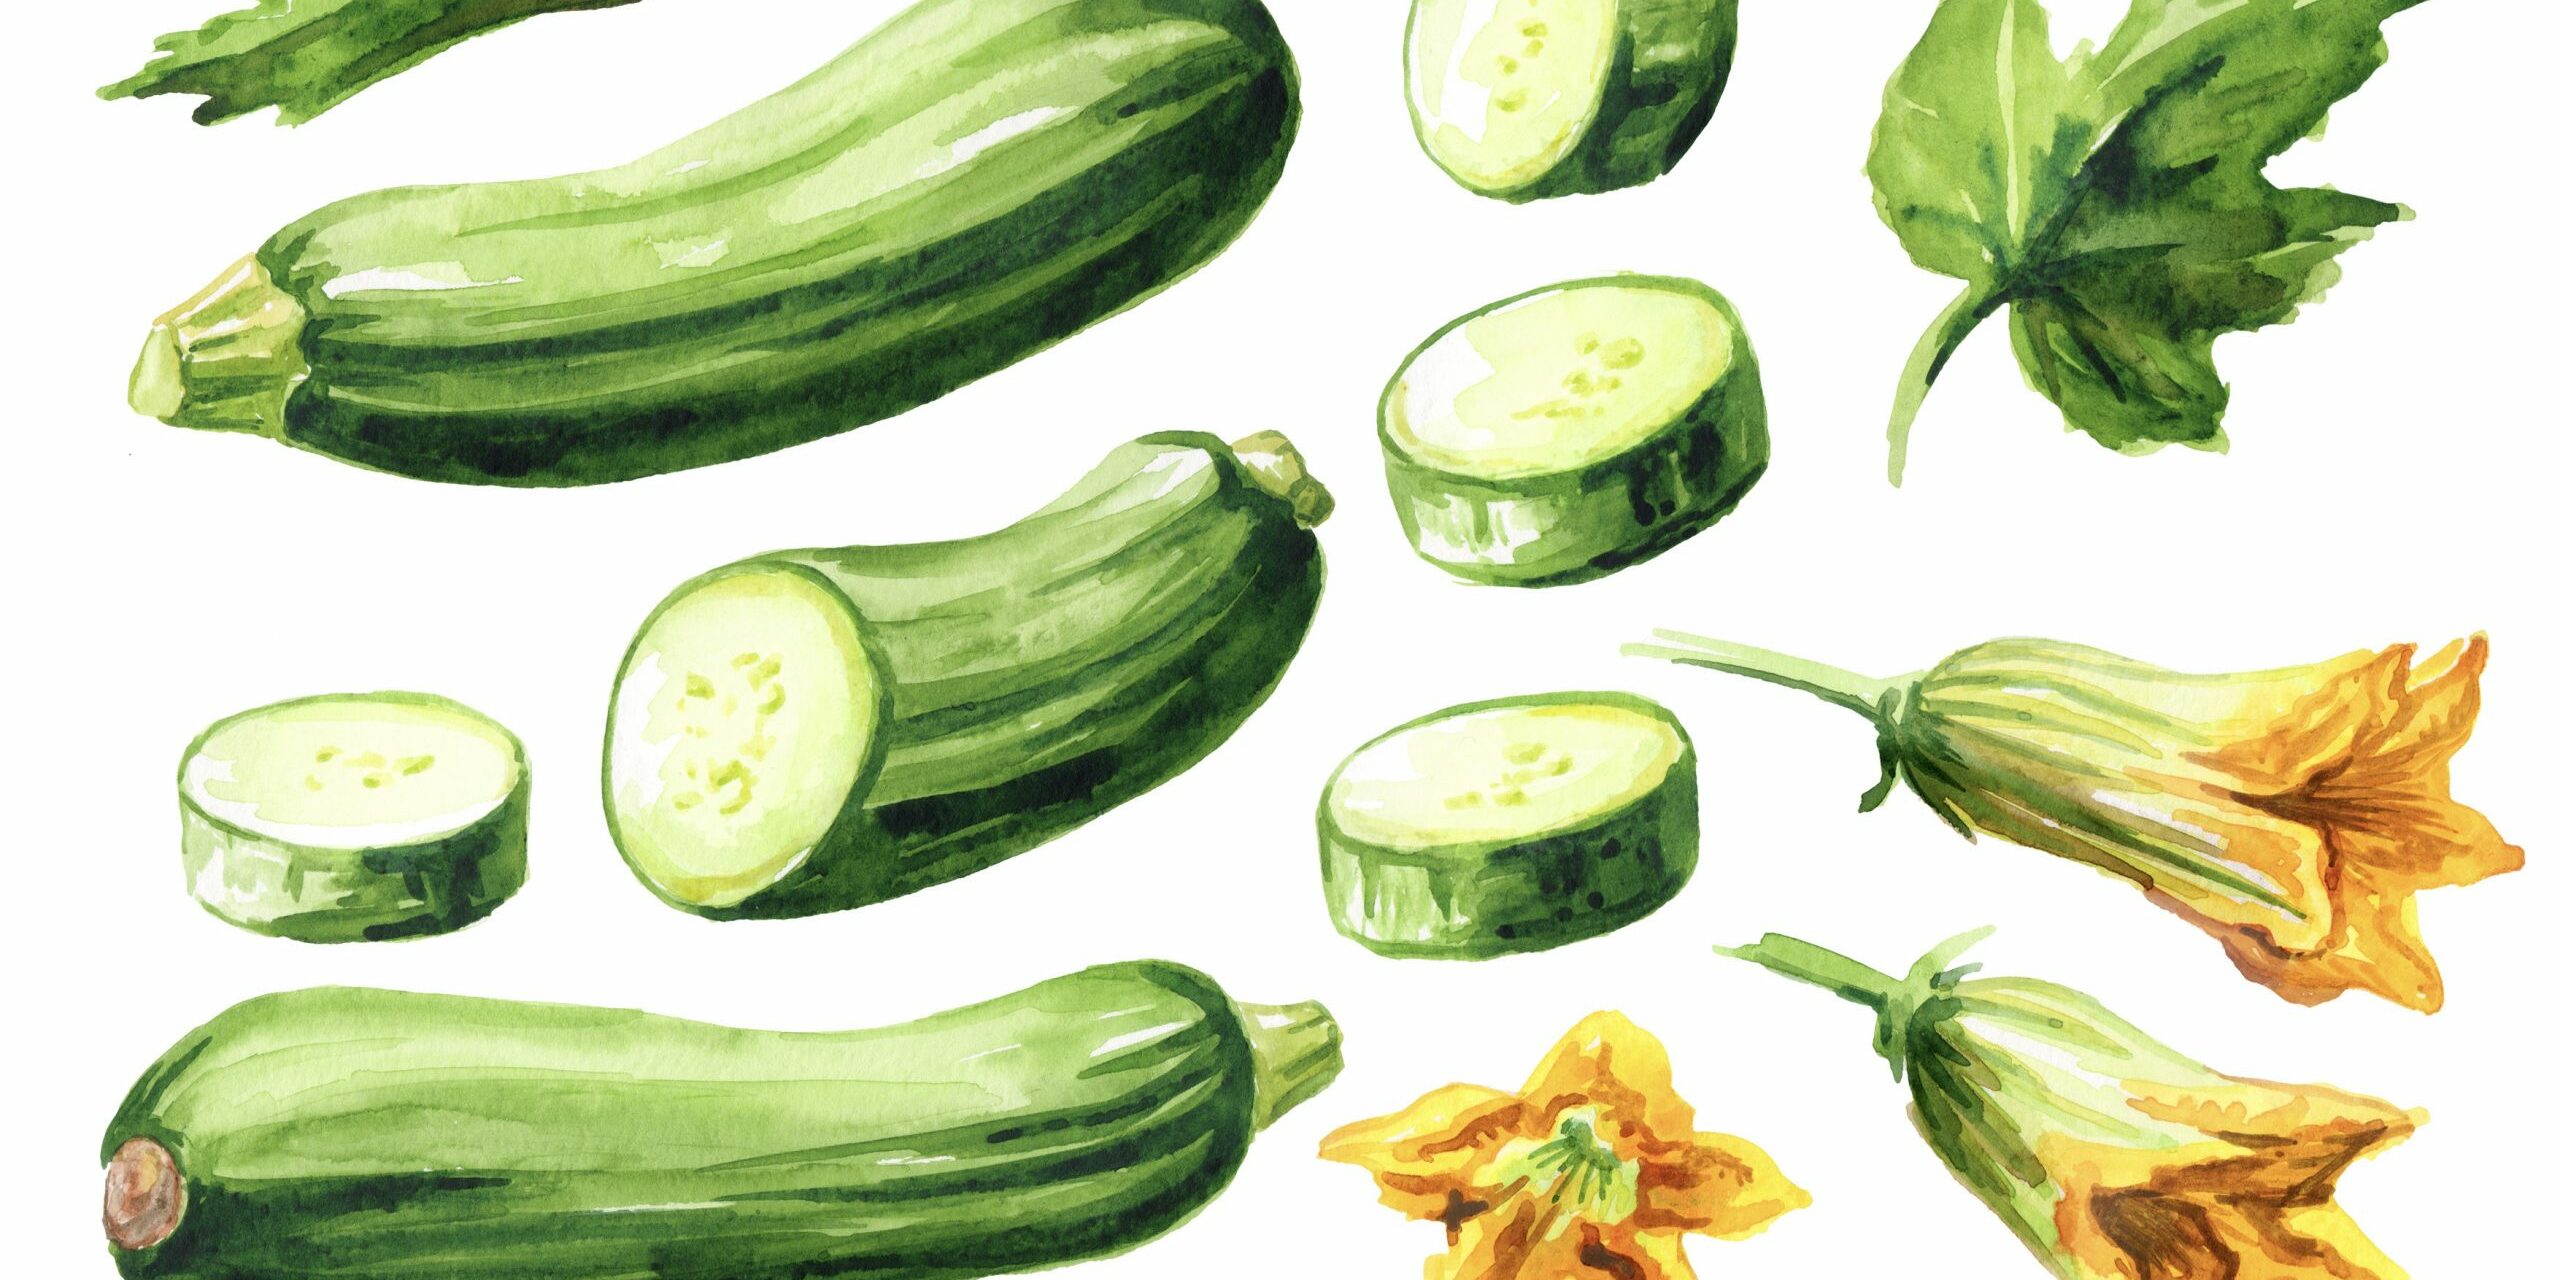 Green whole and cut zucchini vegetables with leaf and flower set. Hand drawn watercolor illustration, isolated on white background